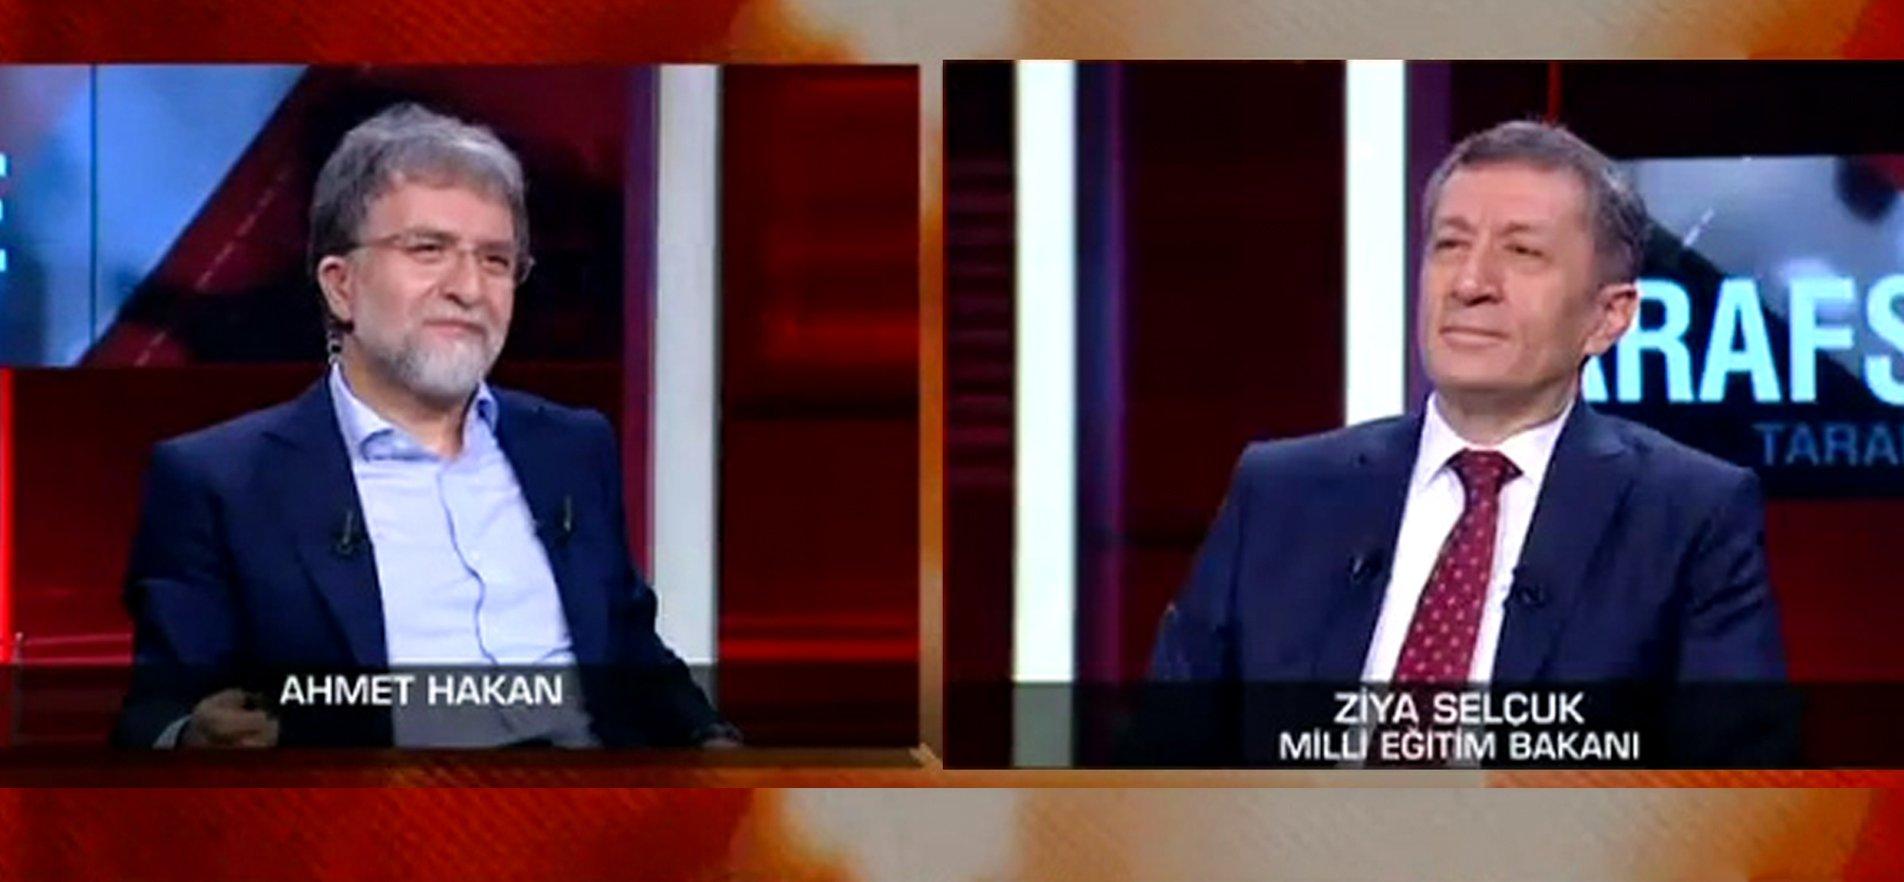 MINISTER SELÇUK ANSWERED QUESTIONS ABOUT EDUCATION IN A CNN TURK TV PROGRAM